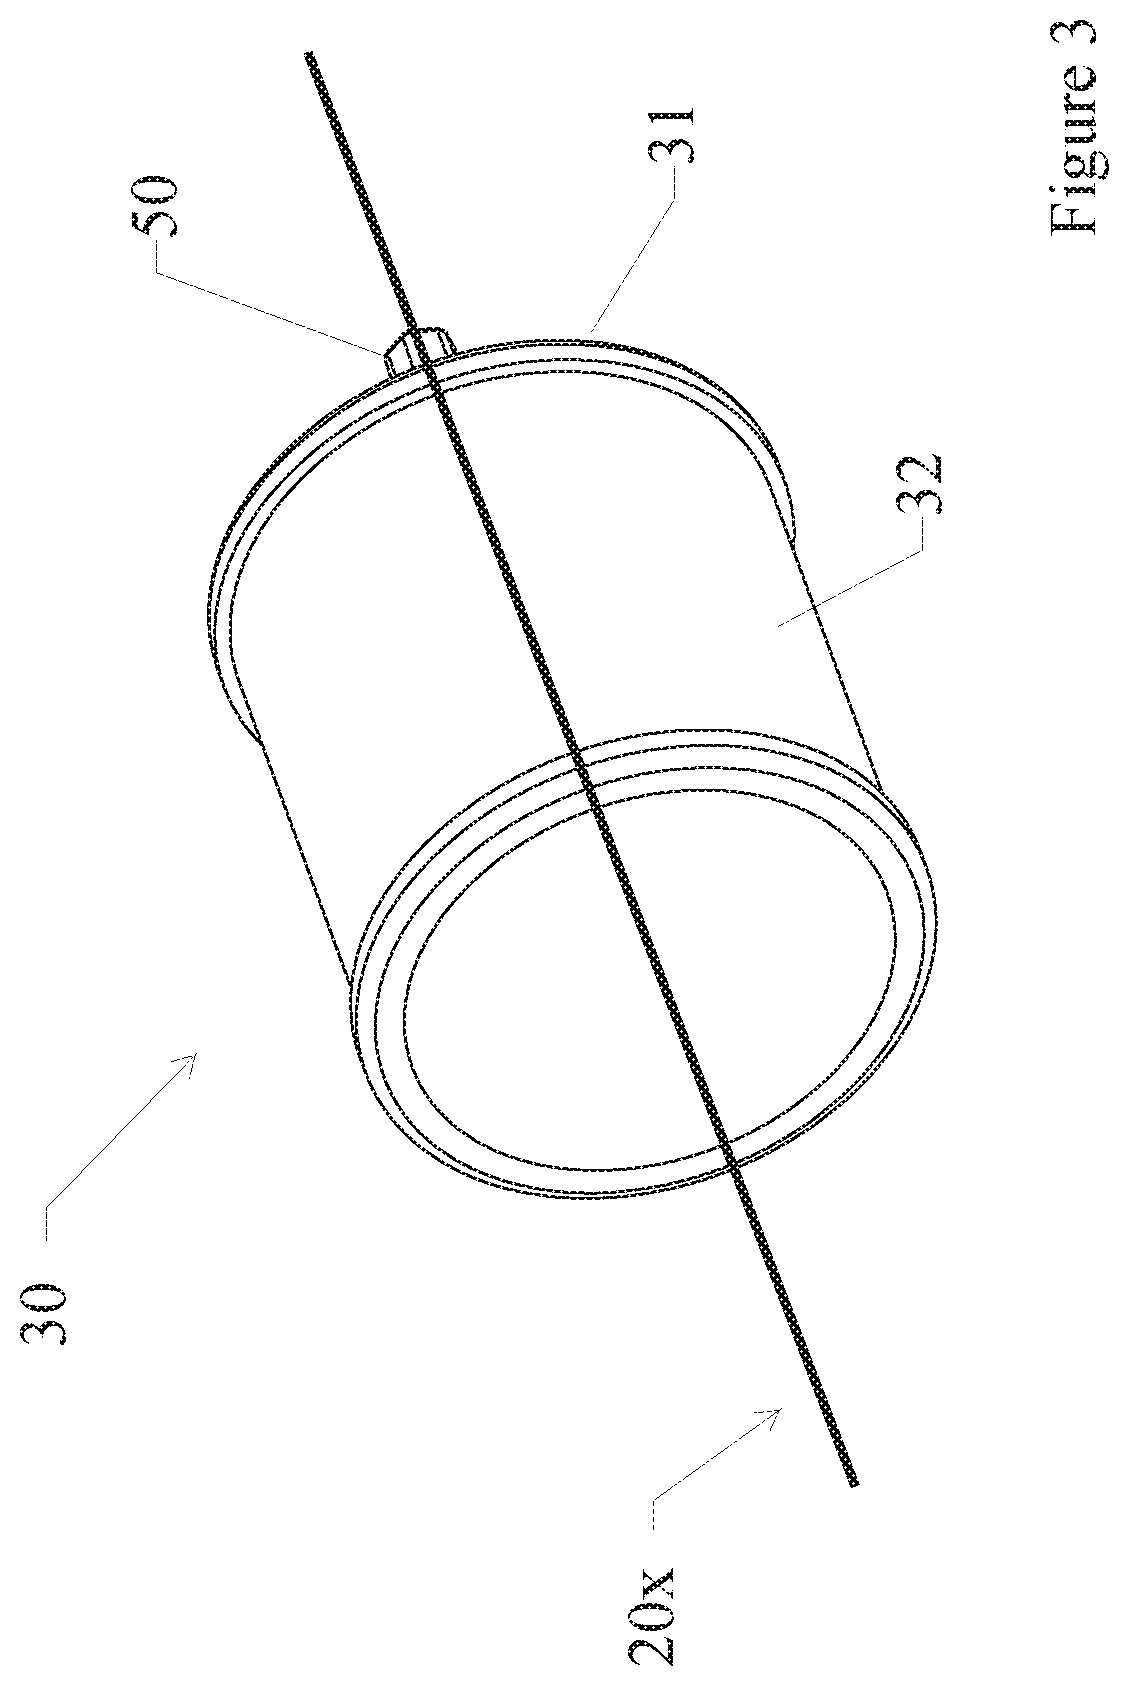 Pet grooming and skin care tool and methods of making and using the tool